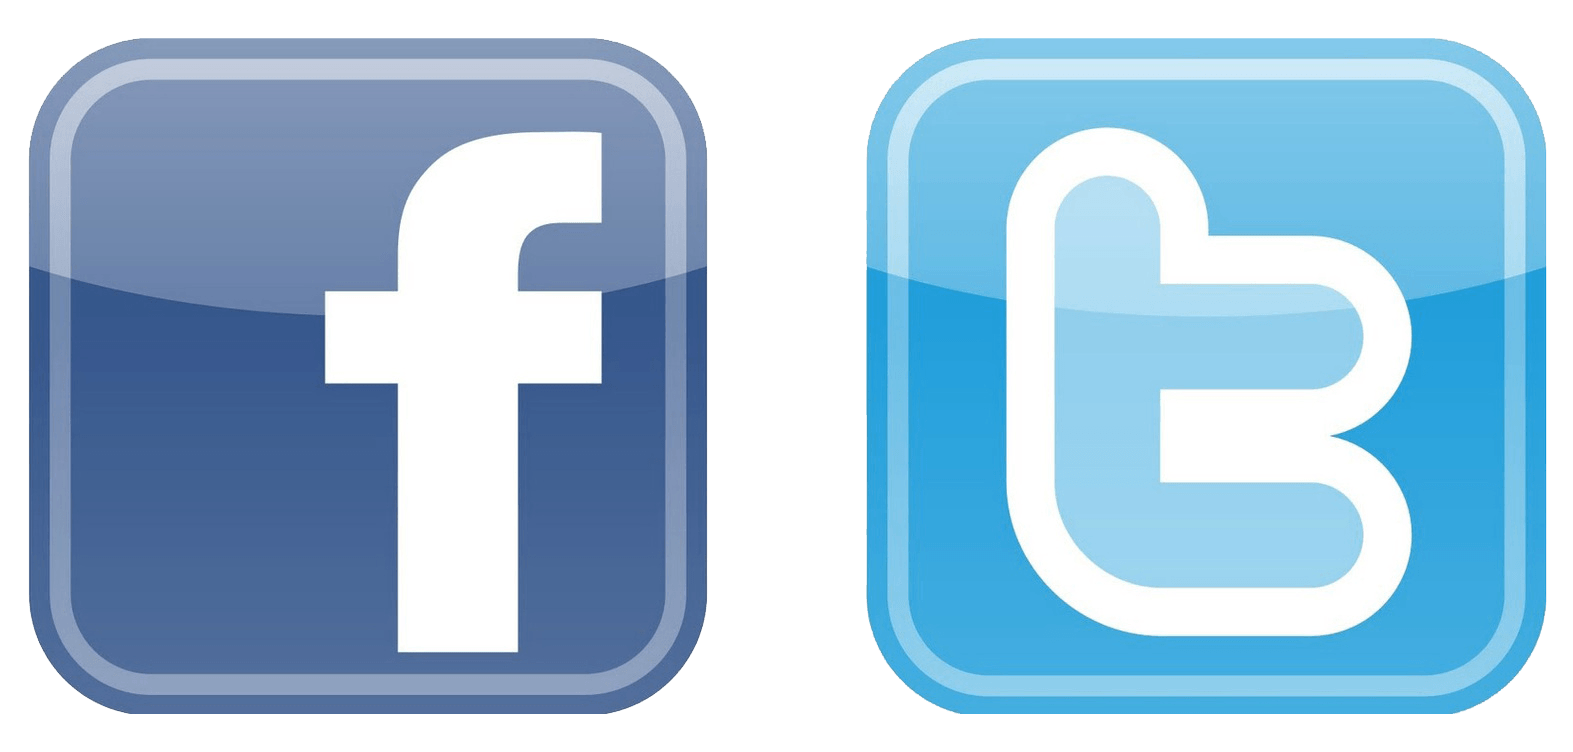 I Can Use Facebook Logo - Facebook logo clipart black and white download free - RR collections